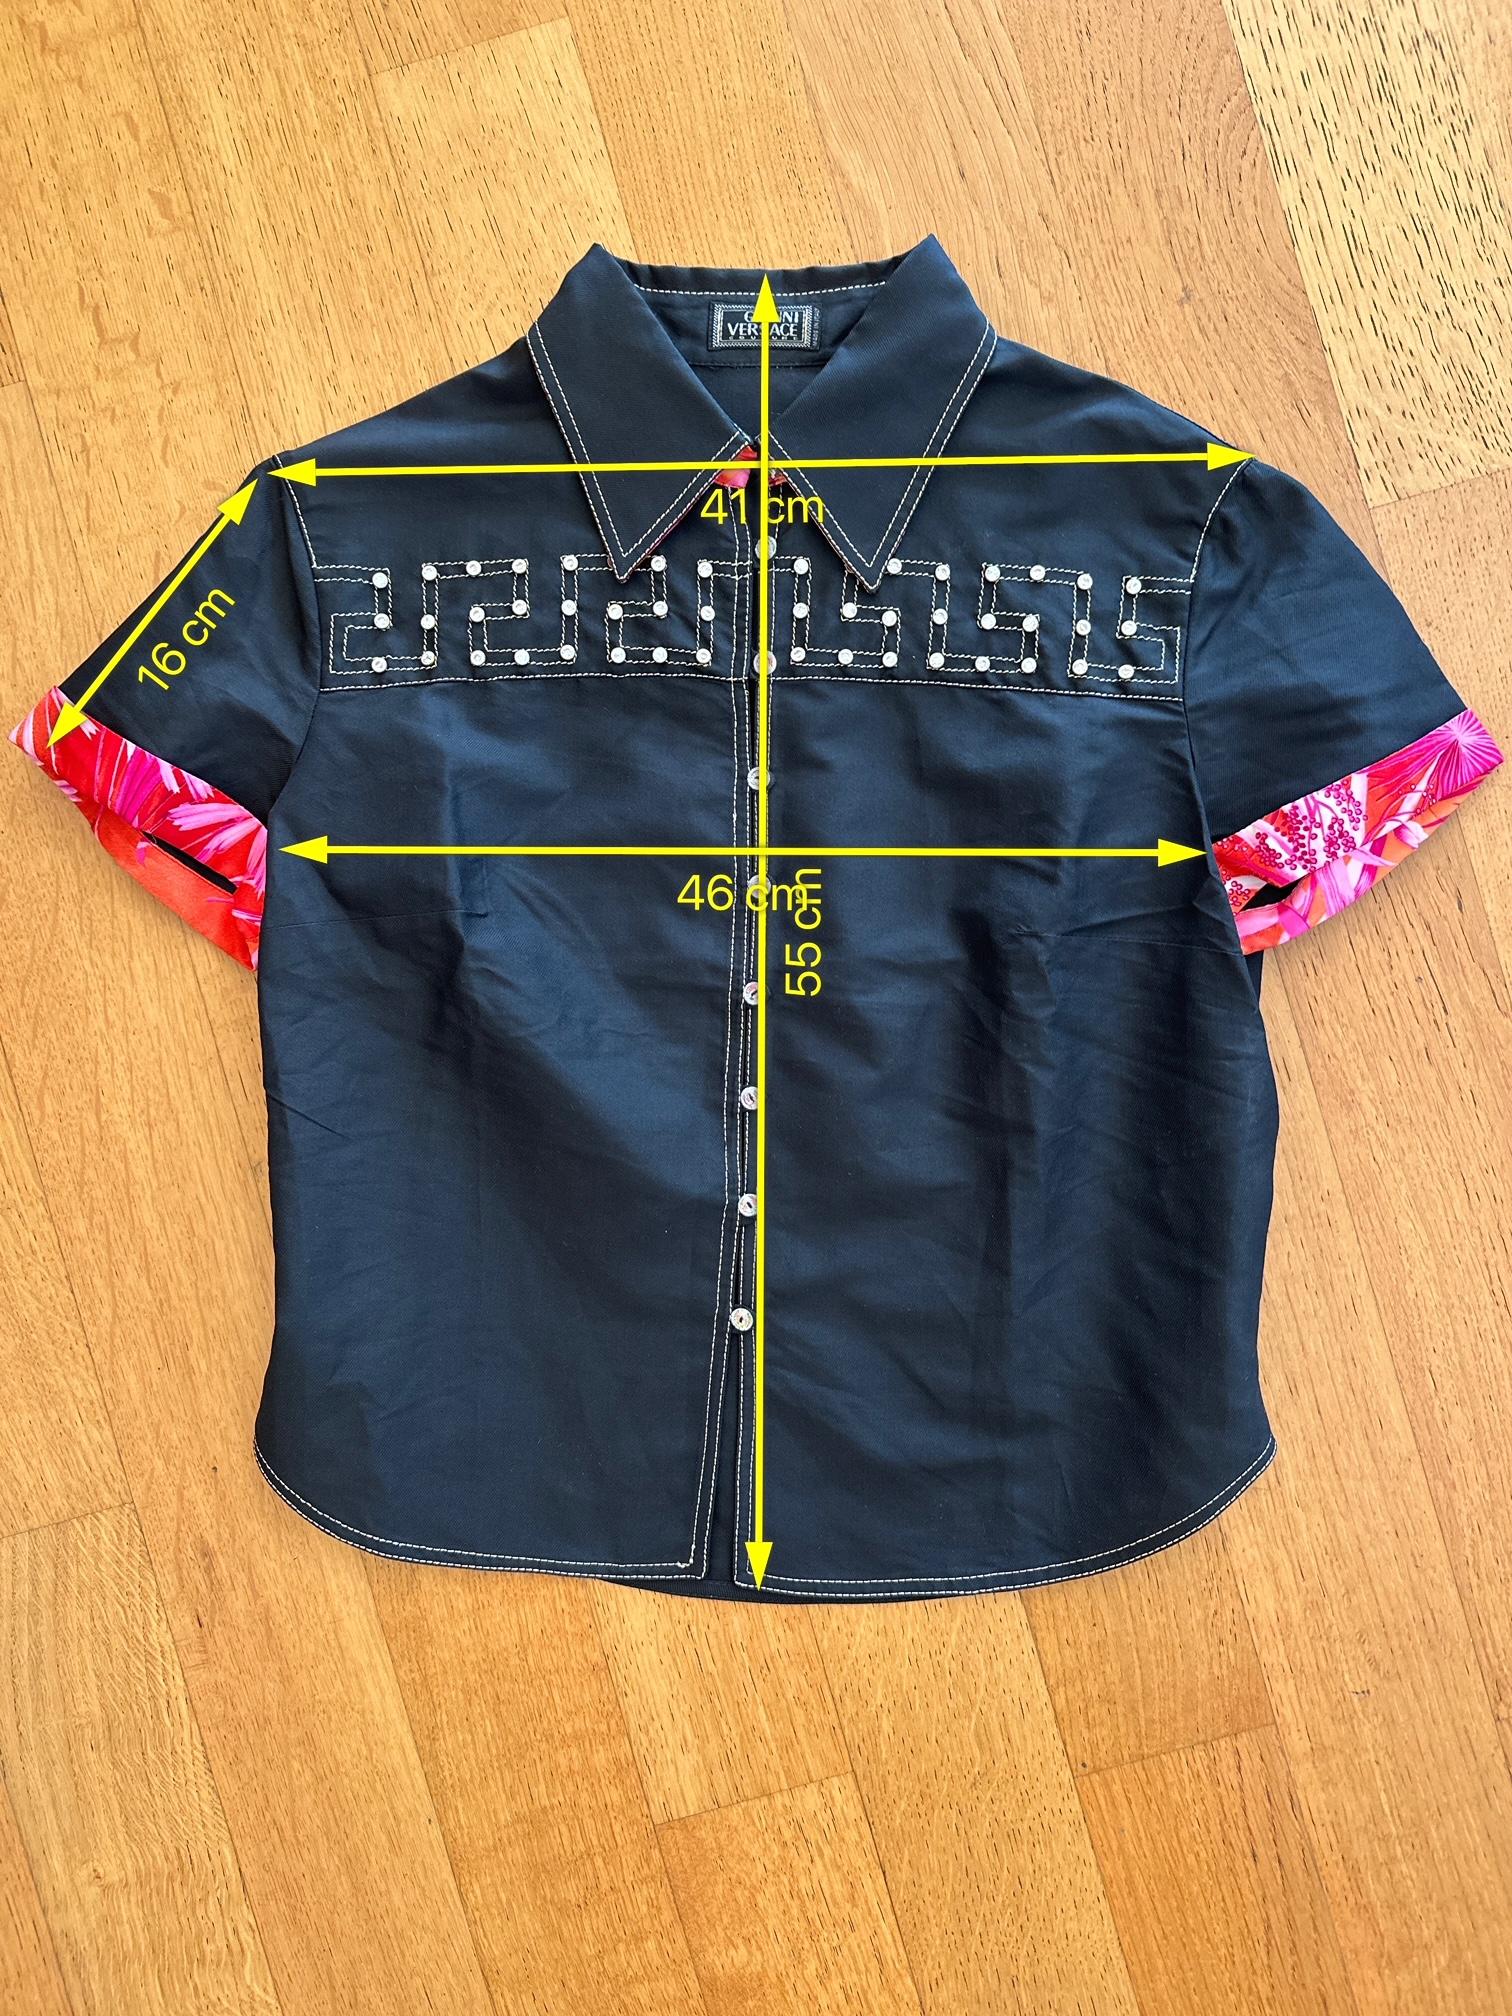 Gianni Versace Couture camicia vintage 2000 For Sale 5